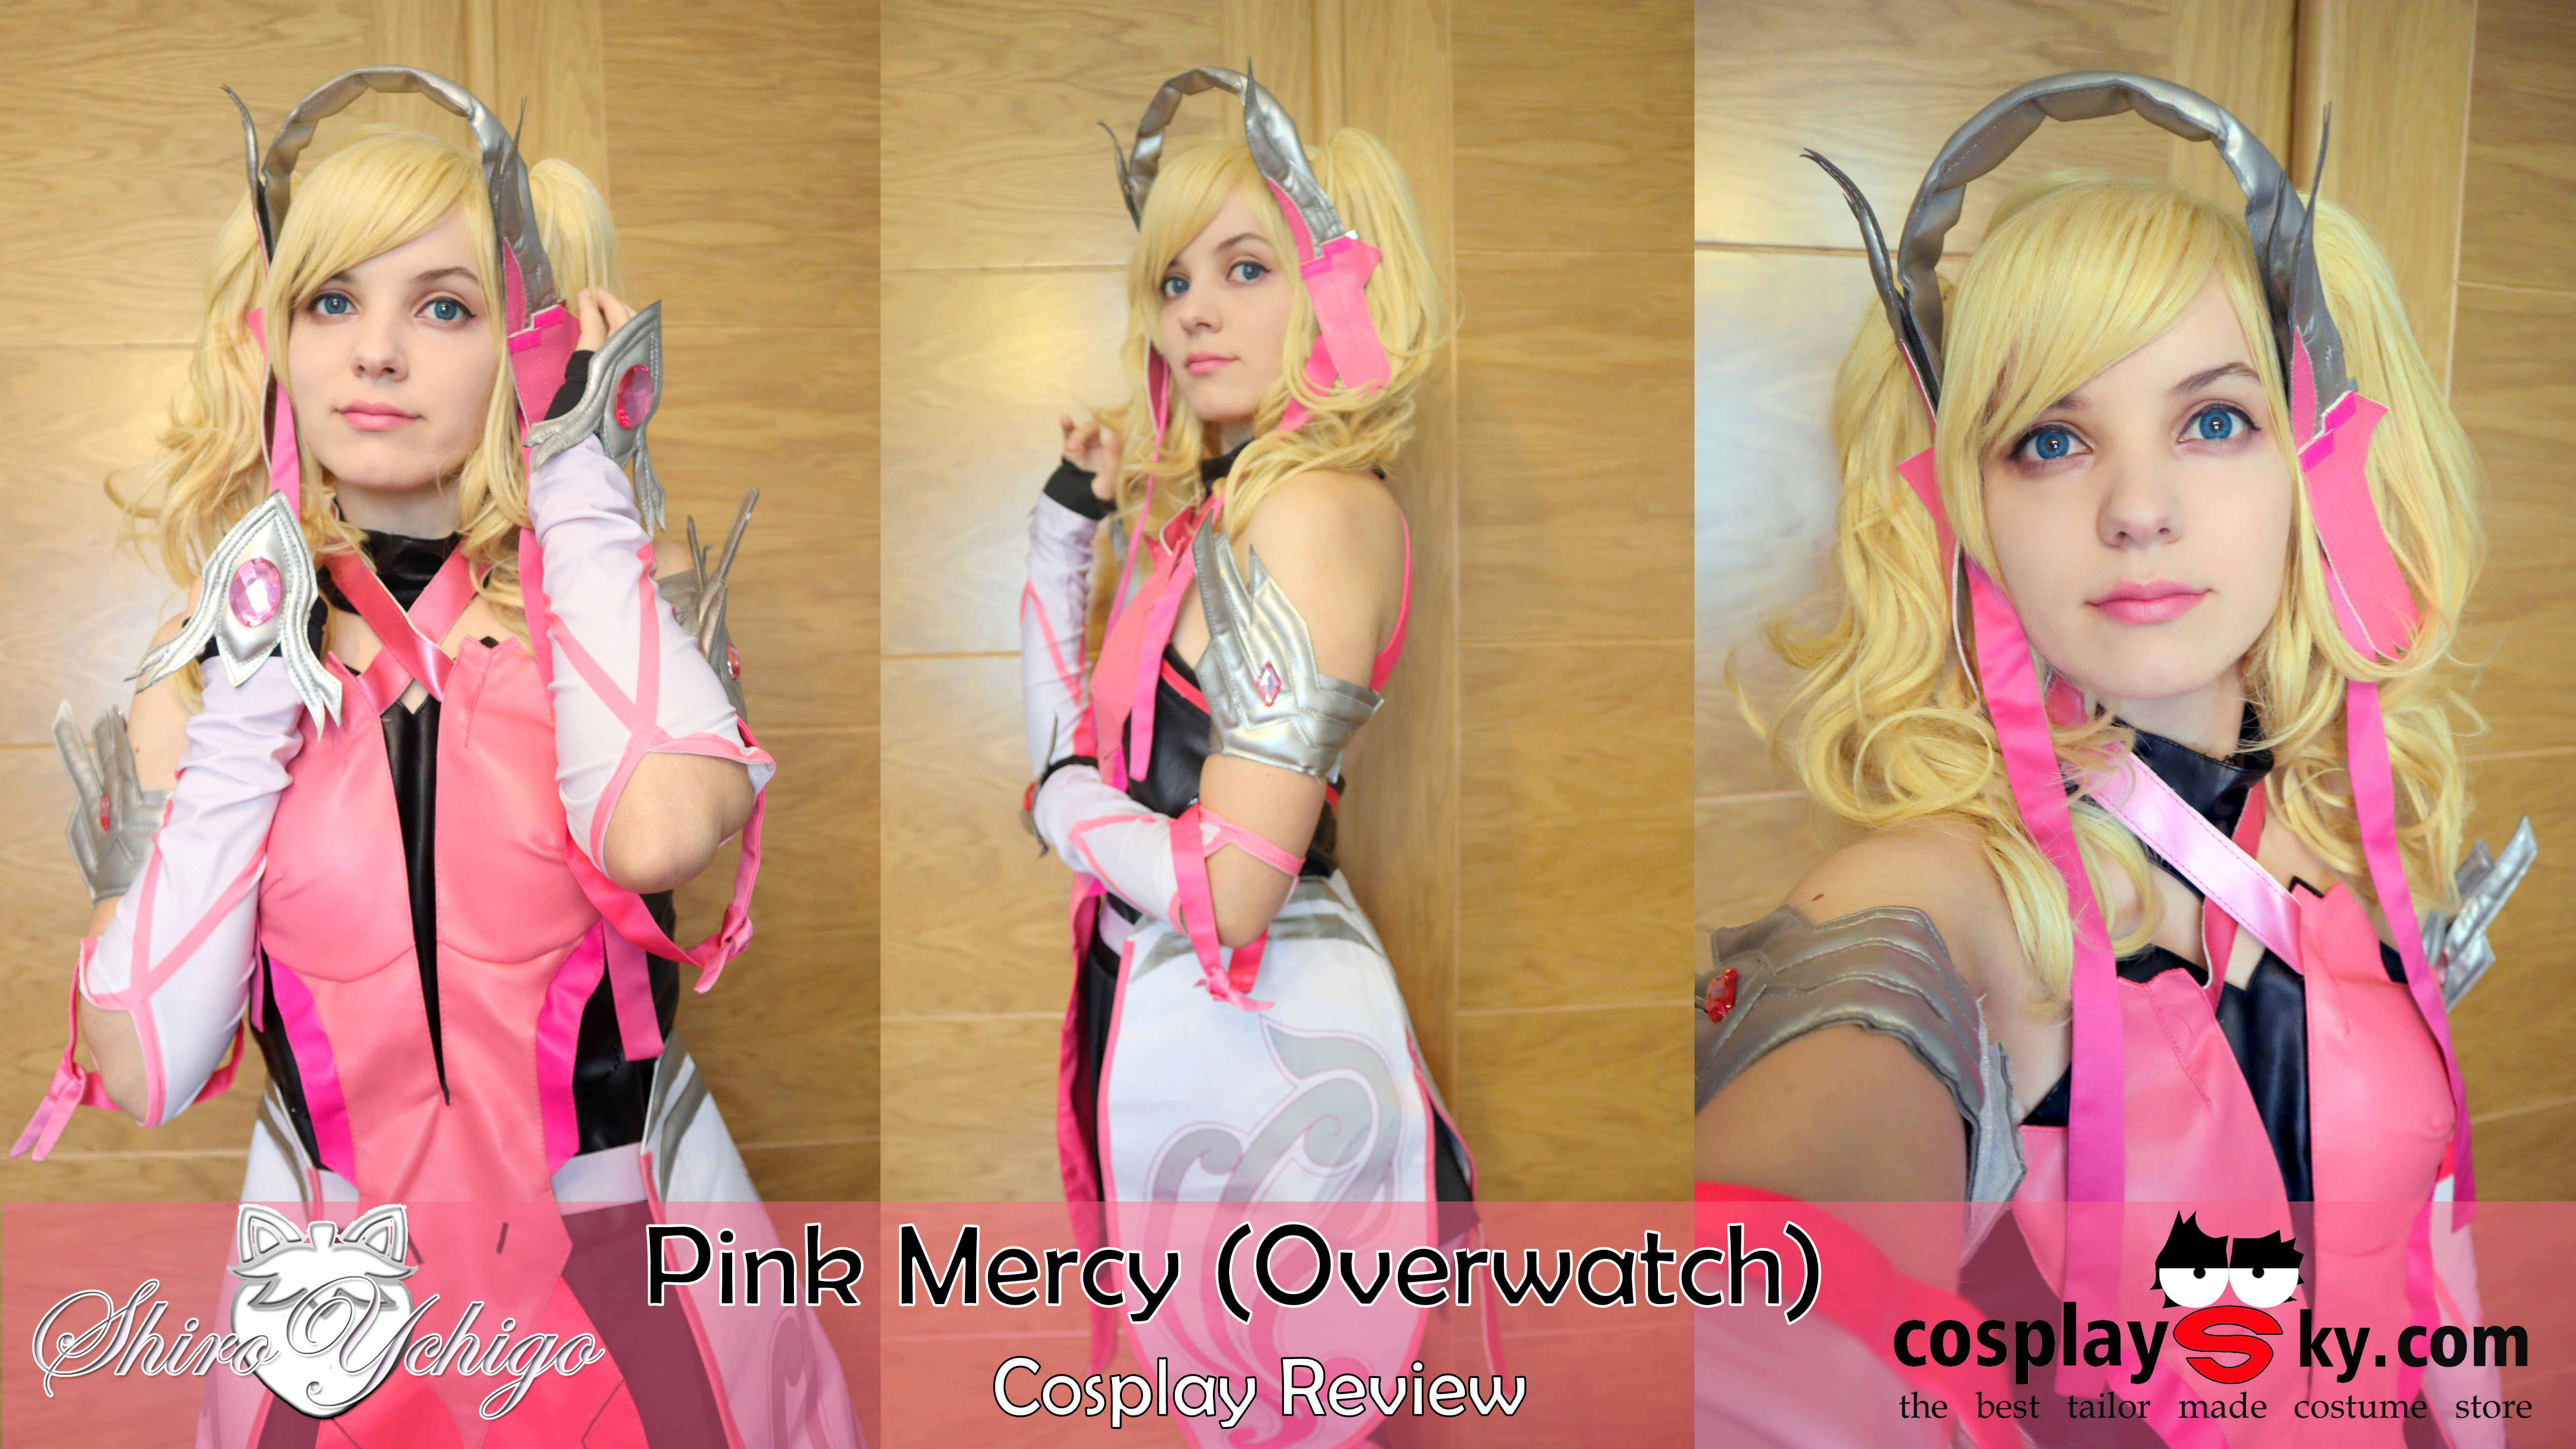 Pink Mercy(Overwatch) cosplay review from CosplaySky